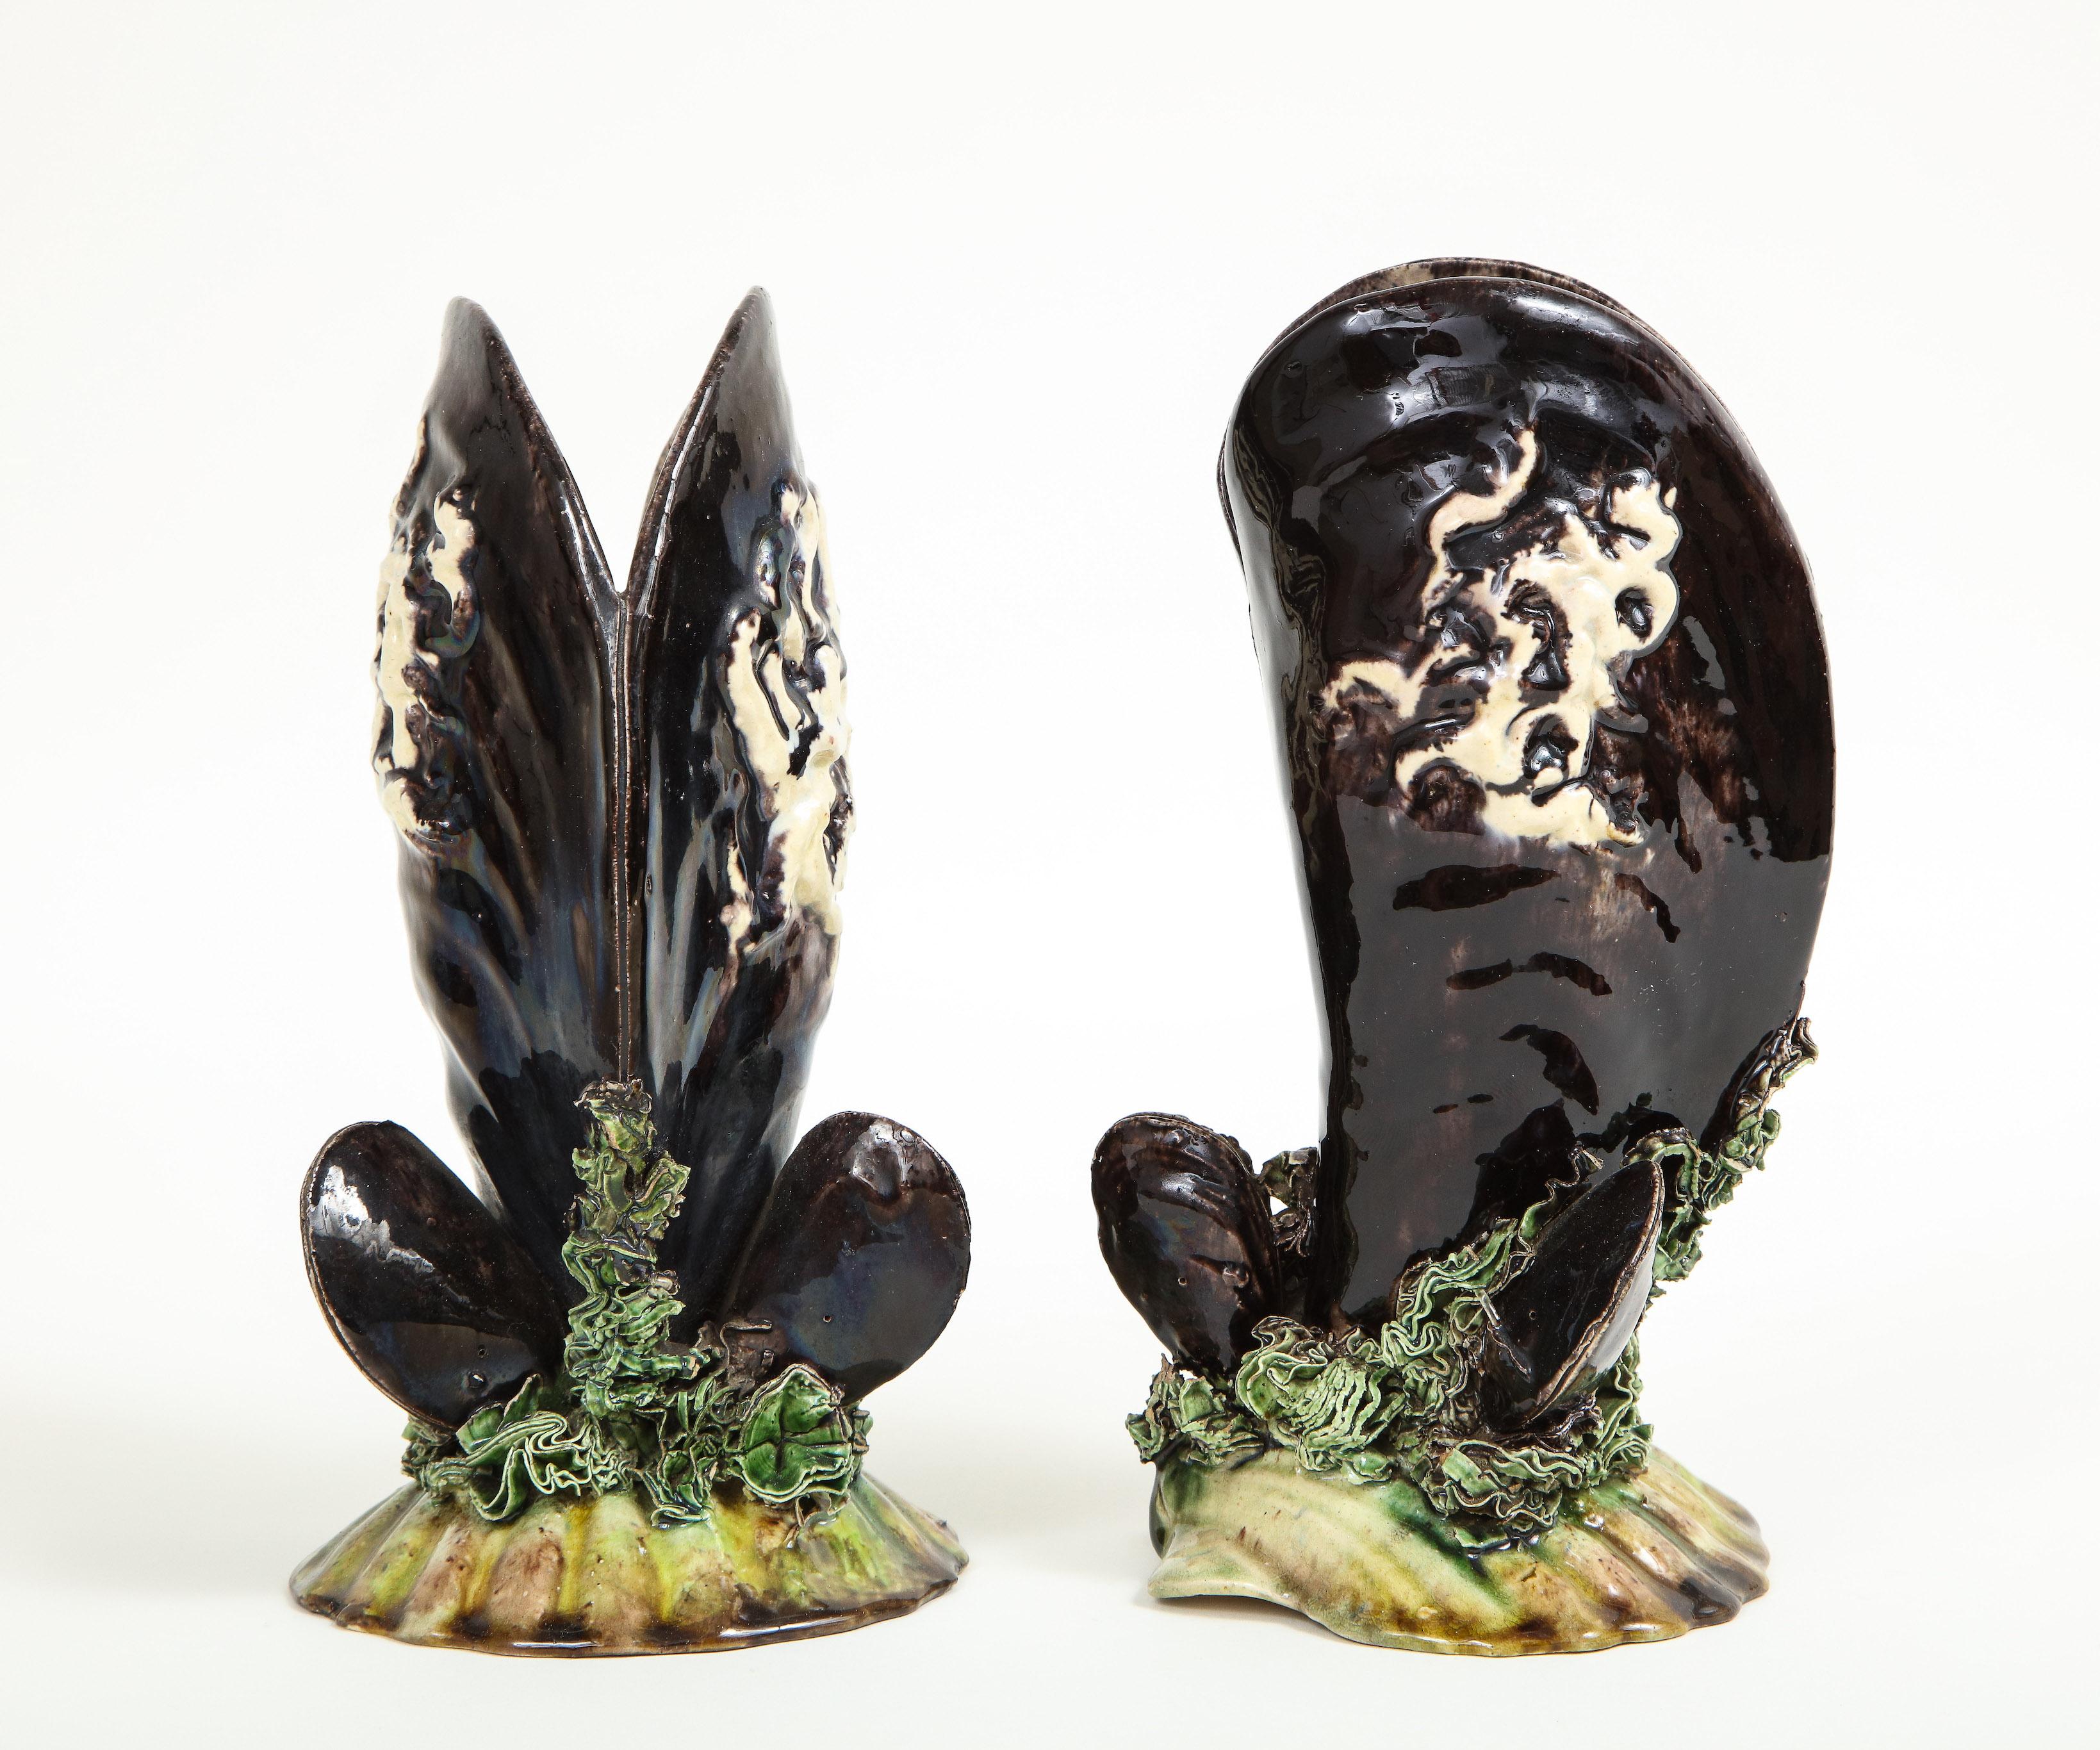 Unusually eccentric vases in the form of black mussel shells resting on a bed of seaweed and a scallop shell. Caldas da Rainhas factory mark on underside.